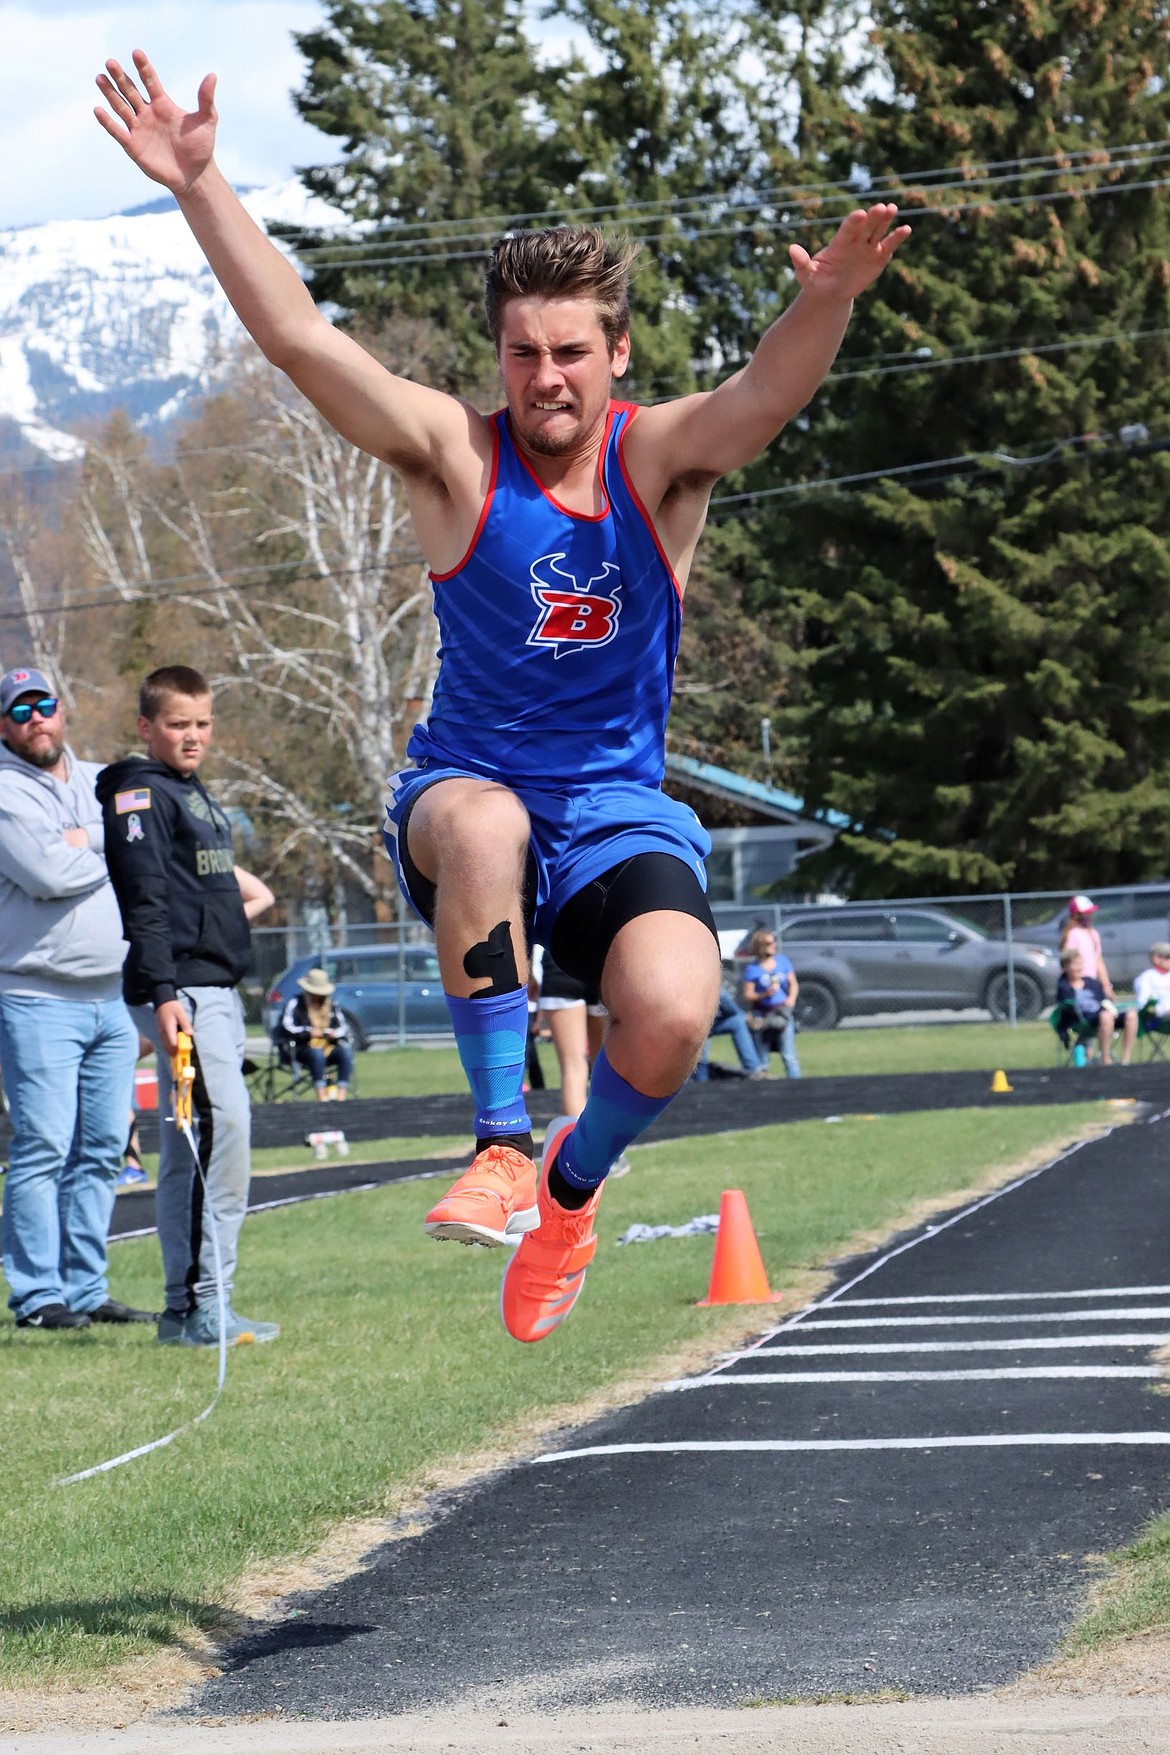 Cormac Benn sends it in the long jump at the Whitefish ARM meet on Saturday.
Courtesy Greg Nelson